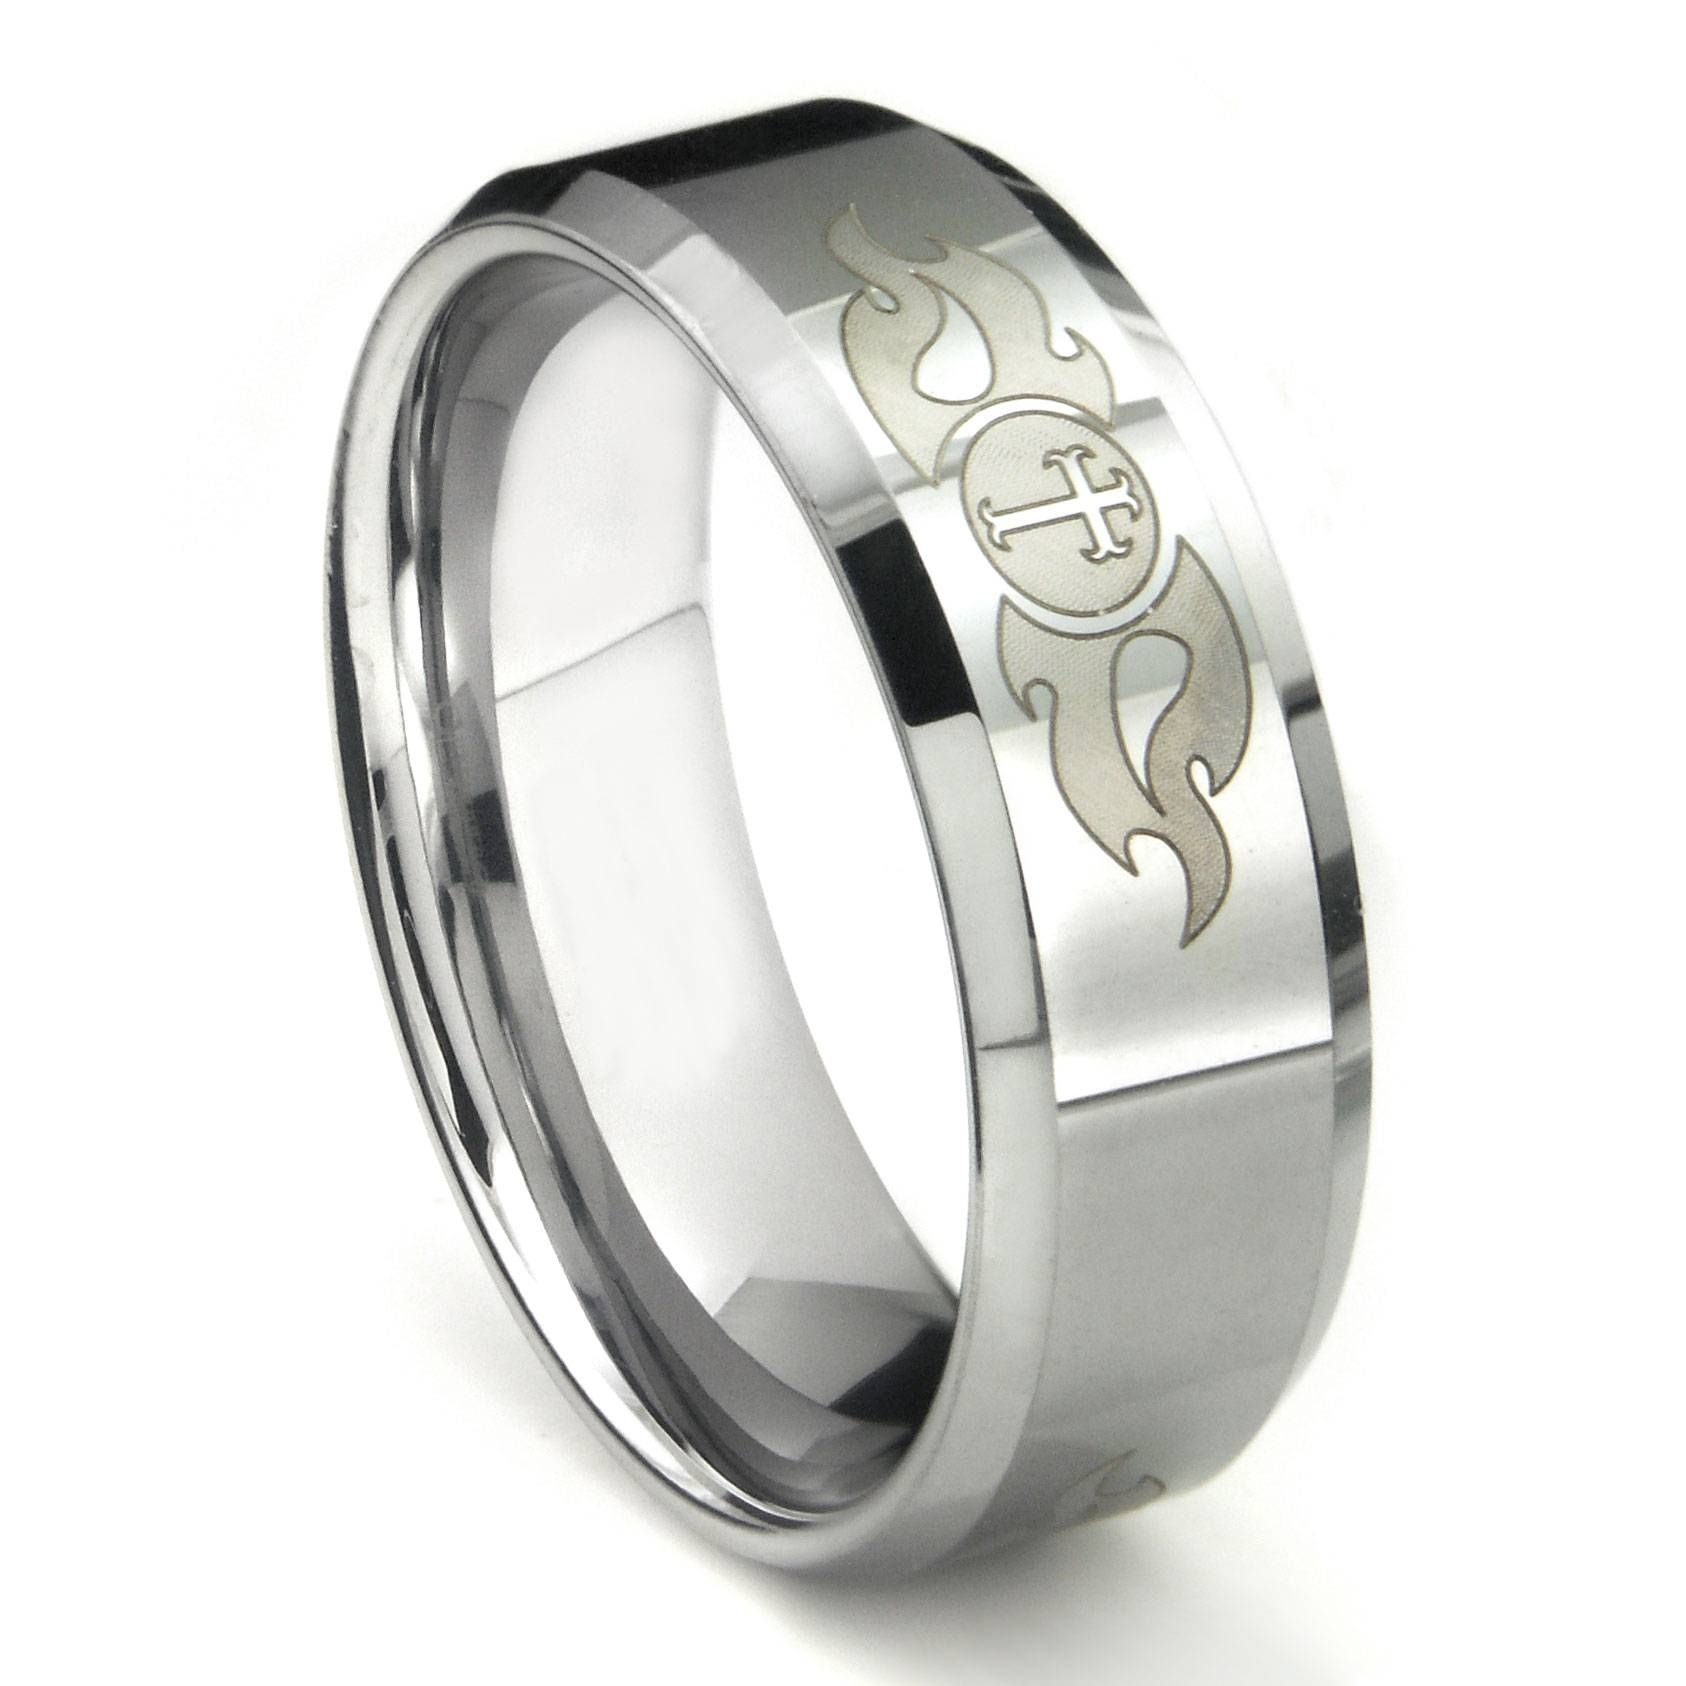 Tungsten Carbide Laser Engraved Fiery Cross Wedding Band Ring With Regard To Cross Wedding Bands (View 1 of 15)